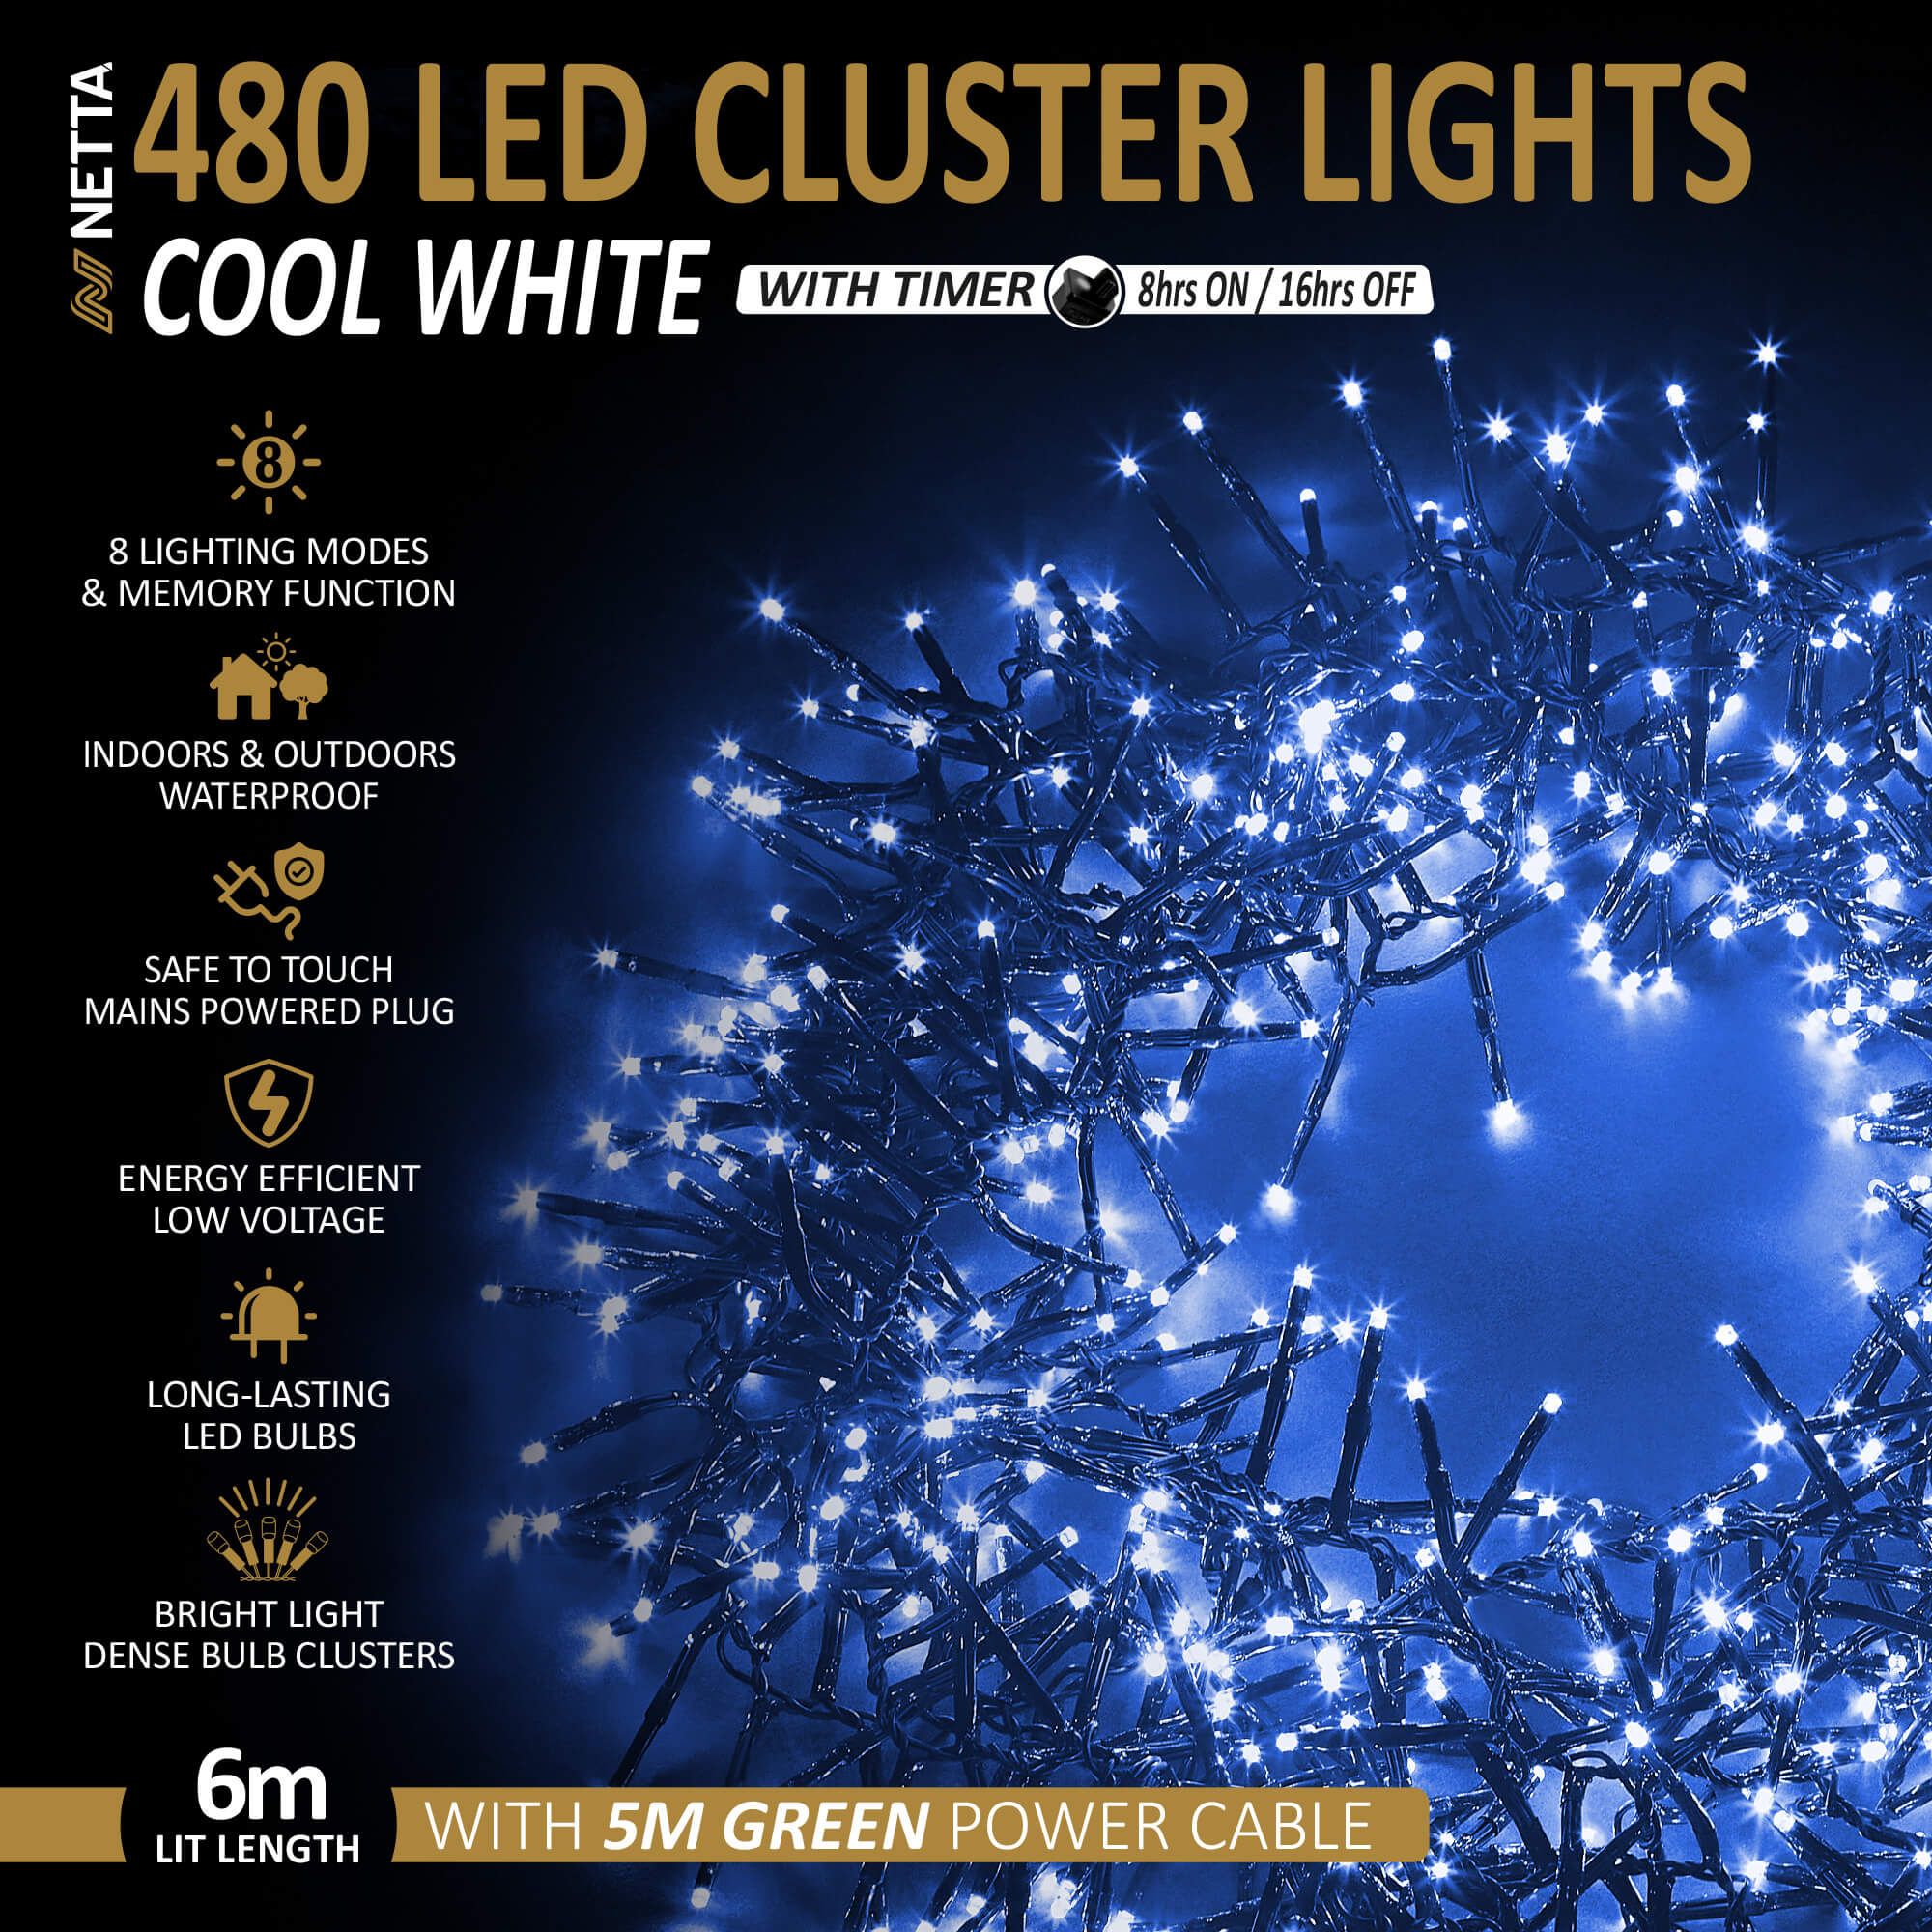 NETTA 480 LED 6M Cluster String Lights Outdoor and Indoor Plug In - Cool White